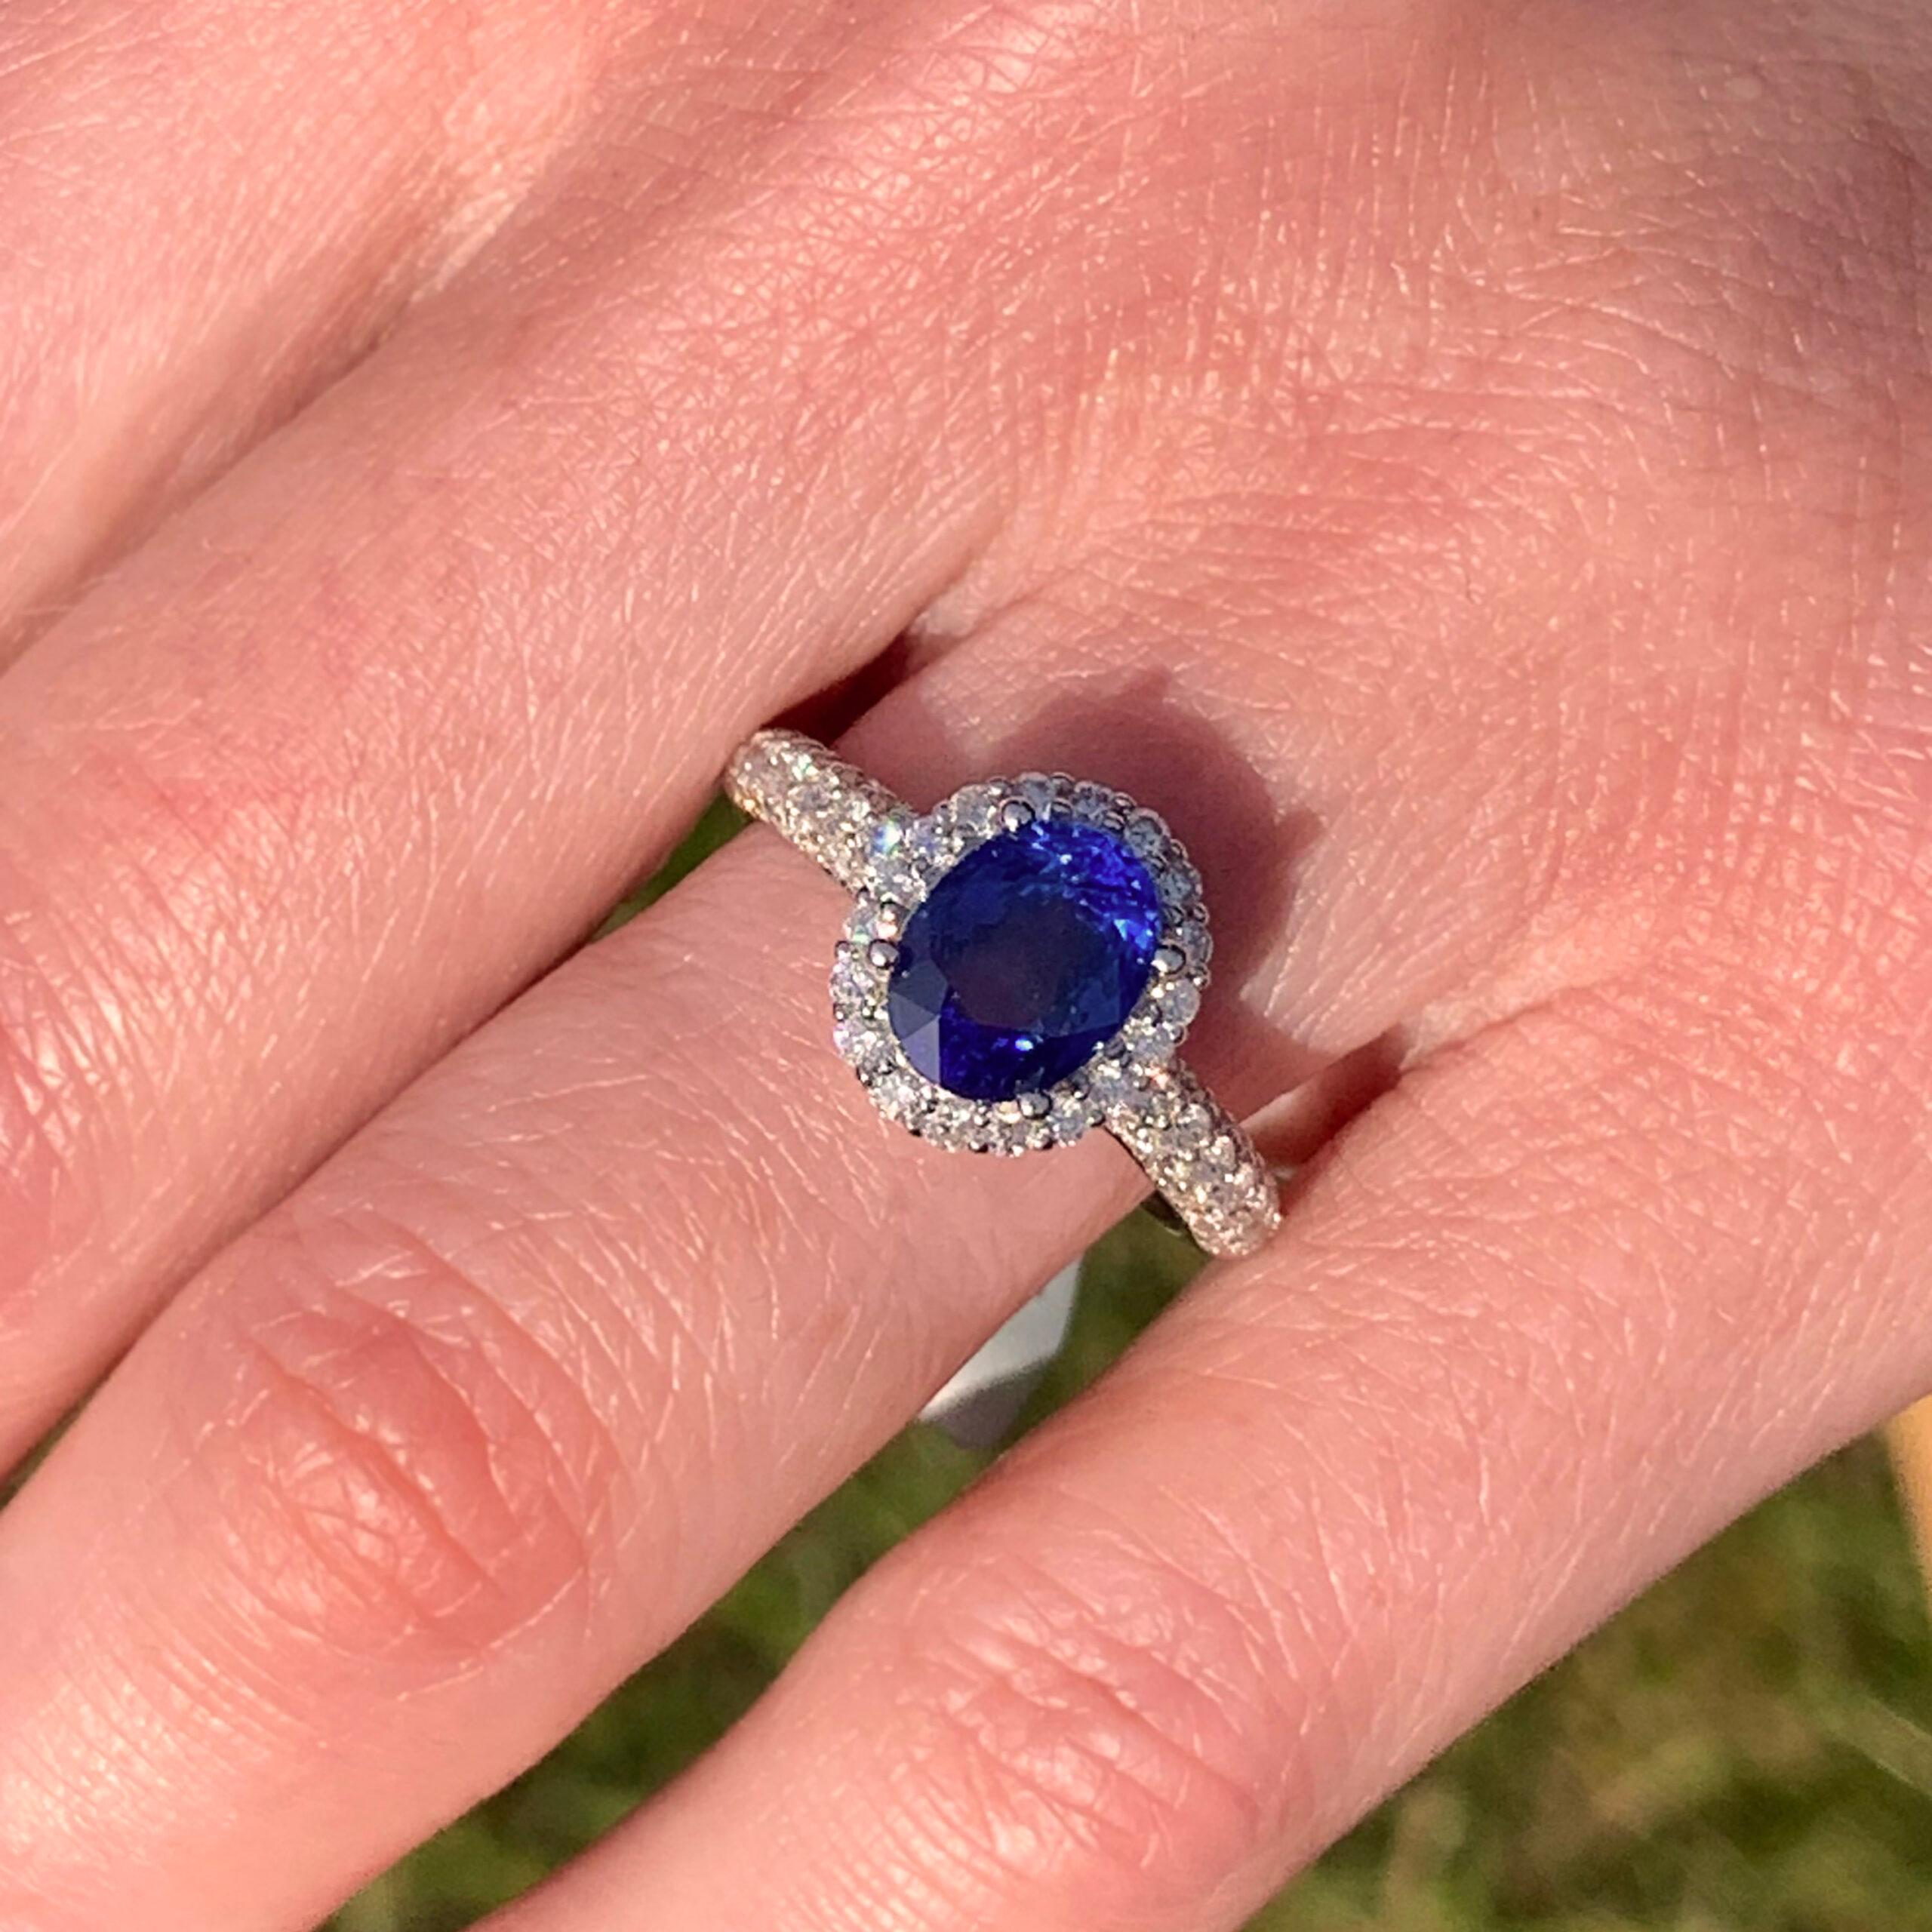 The perfect engagement ring or eternity ring. A beautiful blue sapphire (2.00ct) sits centre stage in this exceptional ring, surrounded by scintillating white diamonds (0.76ct F VS)
Size: N. Band Width: 3mm. Band Profile: Dome. Setting Diameter: